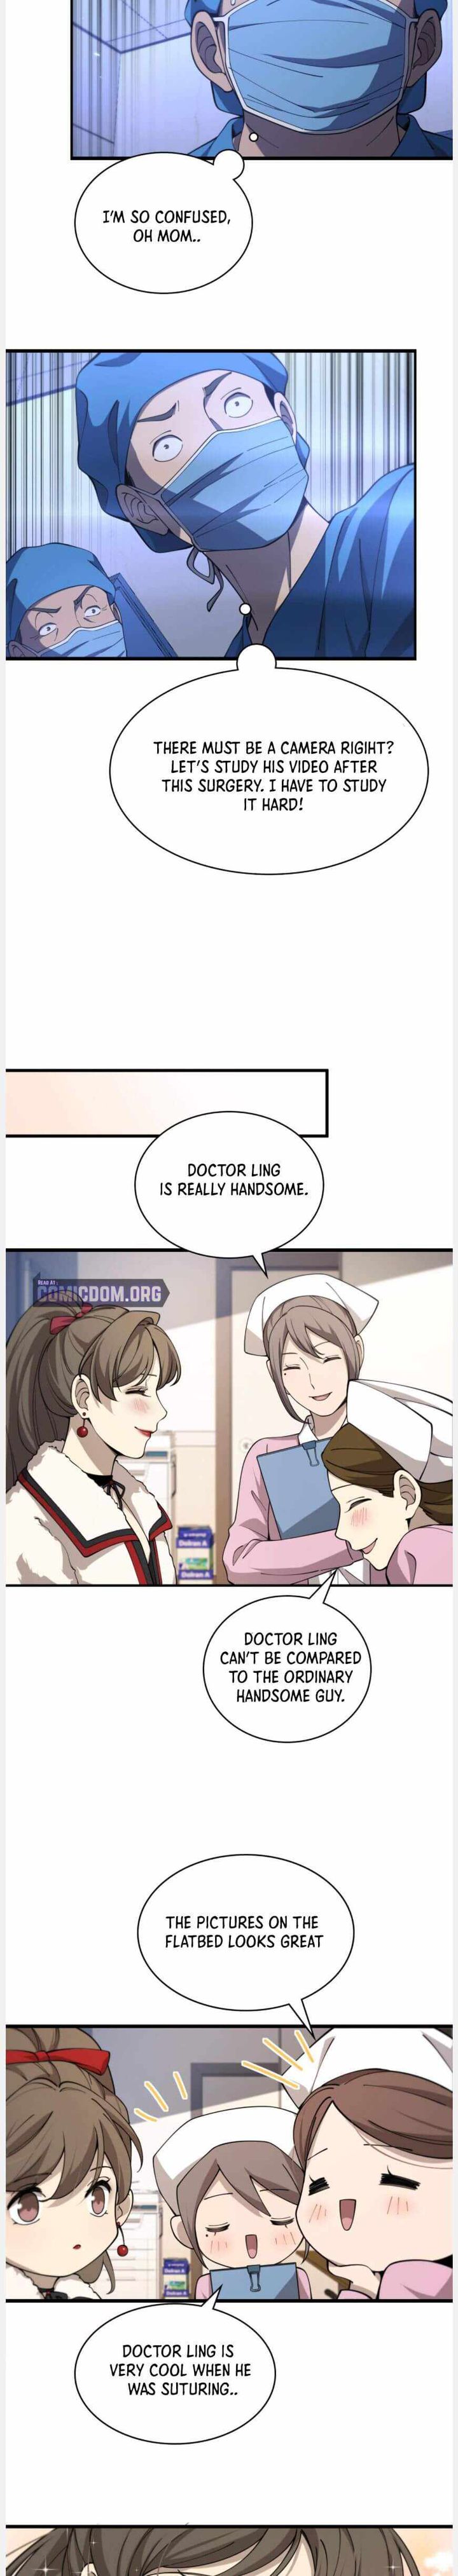 great_doctor_ling_ran_103_14